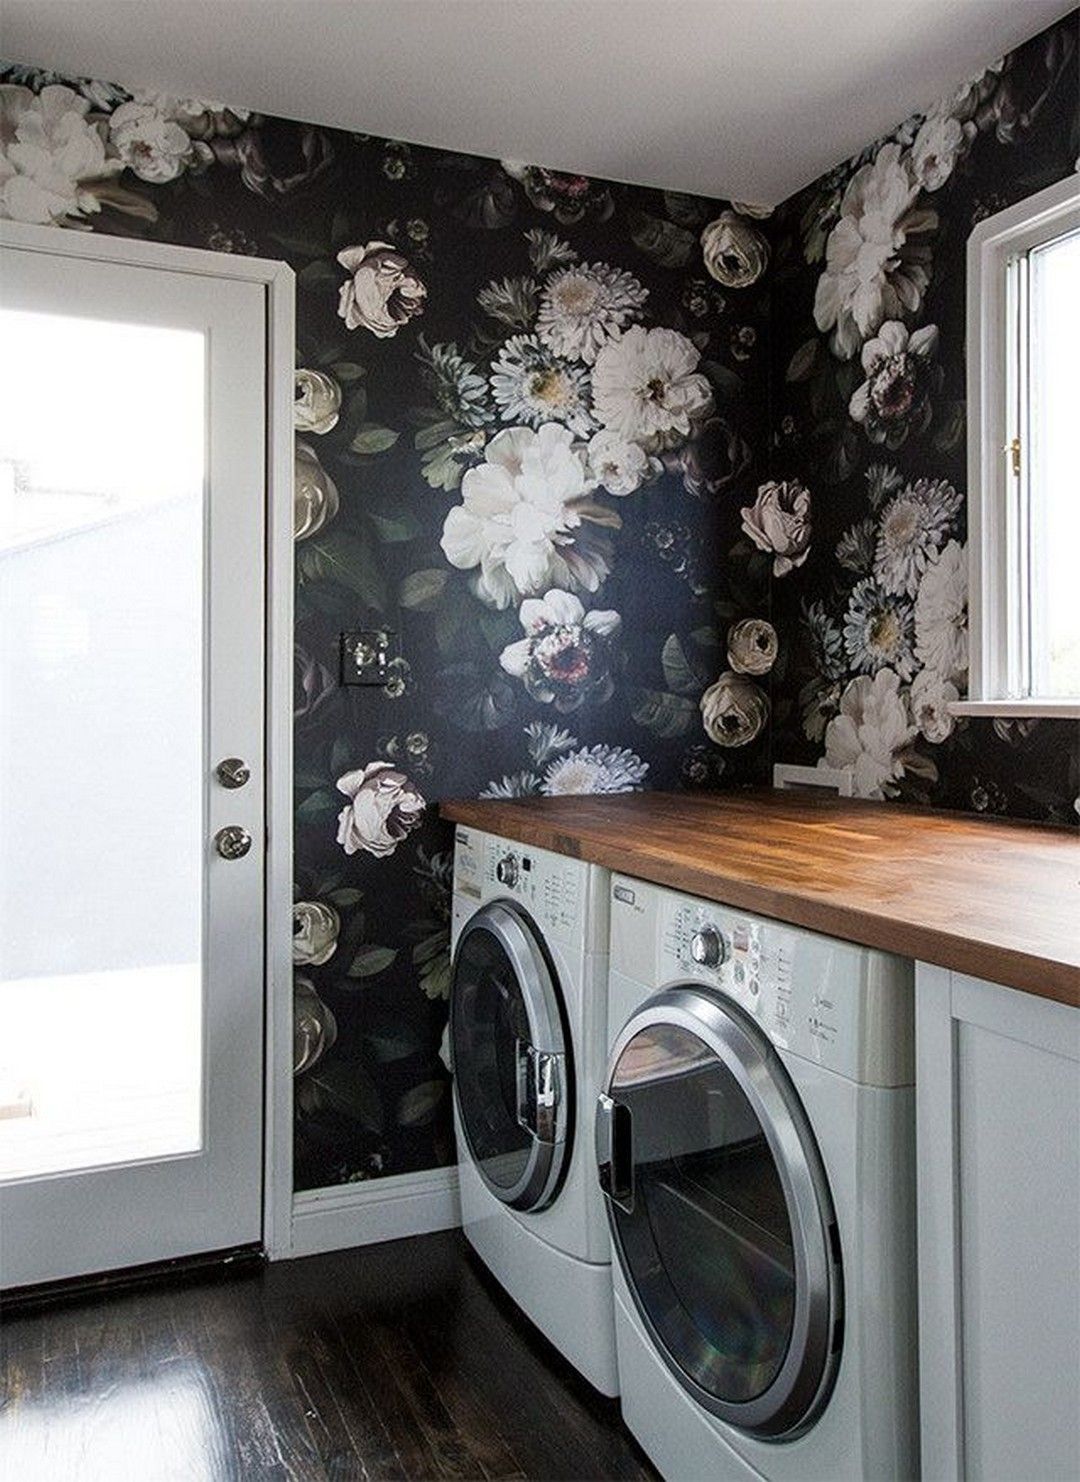 27 Laundry Room Decorating Ideas To Help Organize Space -   16 room decor Wall paper ideas